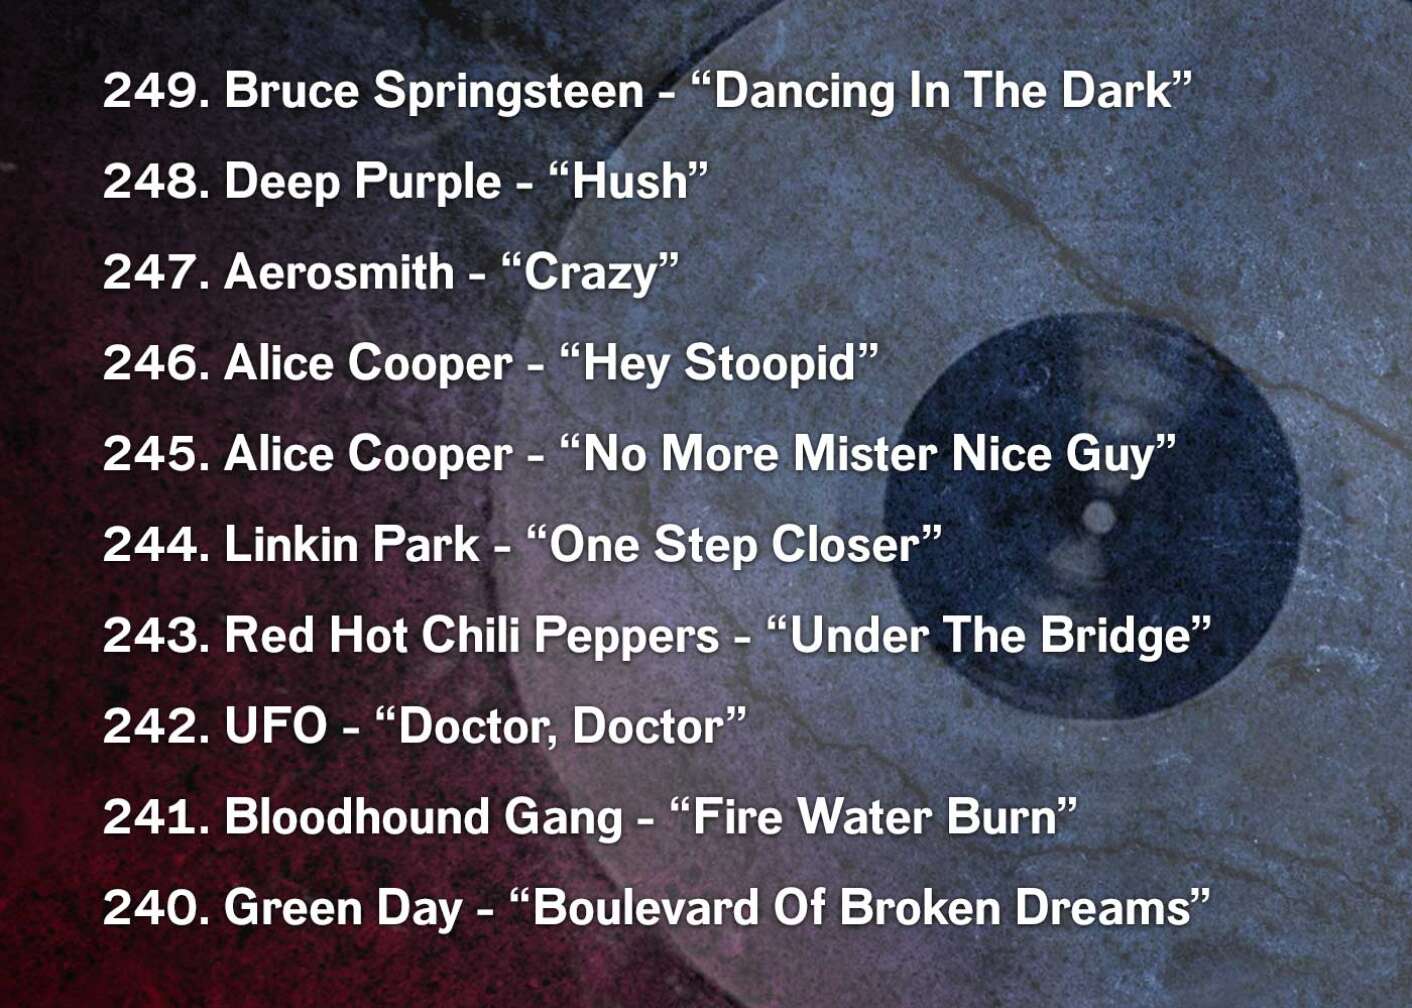 249. Bruce Springsteen - “Dancing In The Dark” 248. Deep Purple - “Hush” 247. Aerosmith - “Crazy” 246. Alice Cooper - “Hey Stoopid” 245. Alice Cooper - “No More Mister Nice Guy” 244. Linkin Park - “One Step Closer” 243. Red Hot Chili Peppers - “Under The Bridge” 242. UFO - “Doctor, Doctor” 241. Bloodhound Gang - “Fire Water Burn” 240. Green Day - “Boulevard Of Broken Dreams”